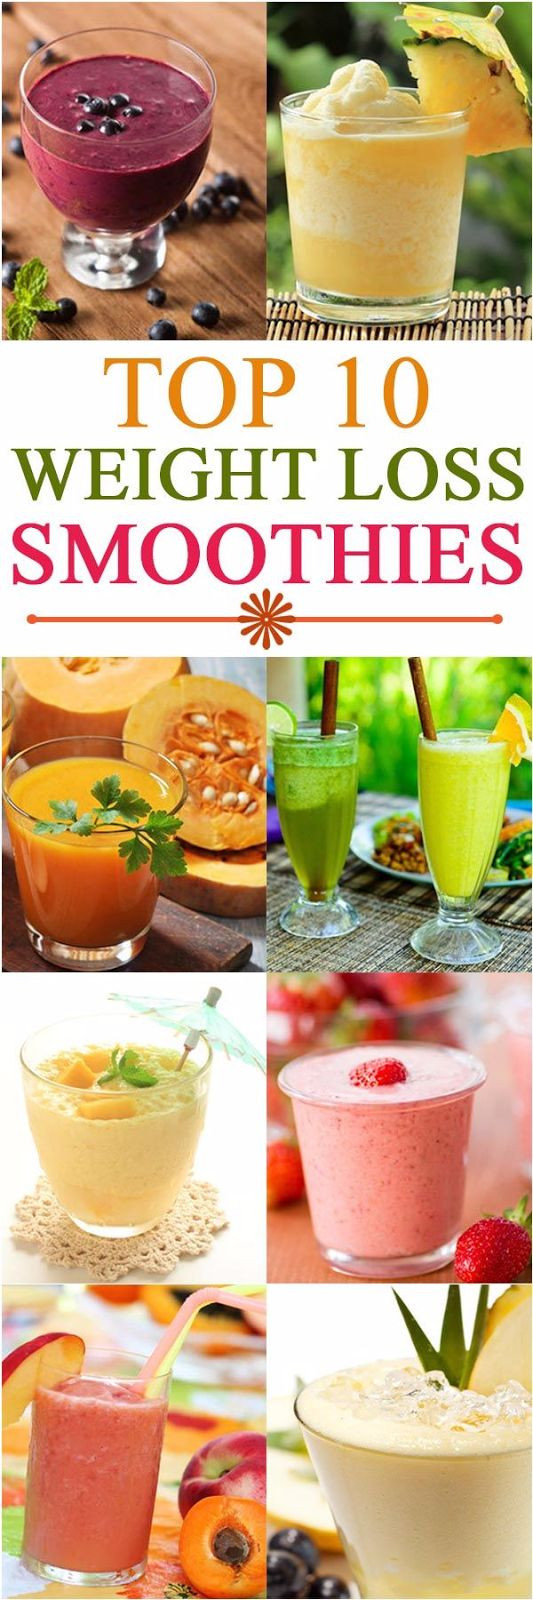 The Best Smoothies For Weight Loss
 21 Weight Loss Smoothies With Recipes And Benefits